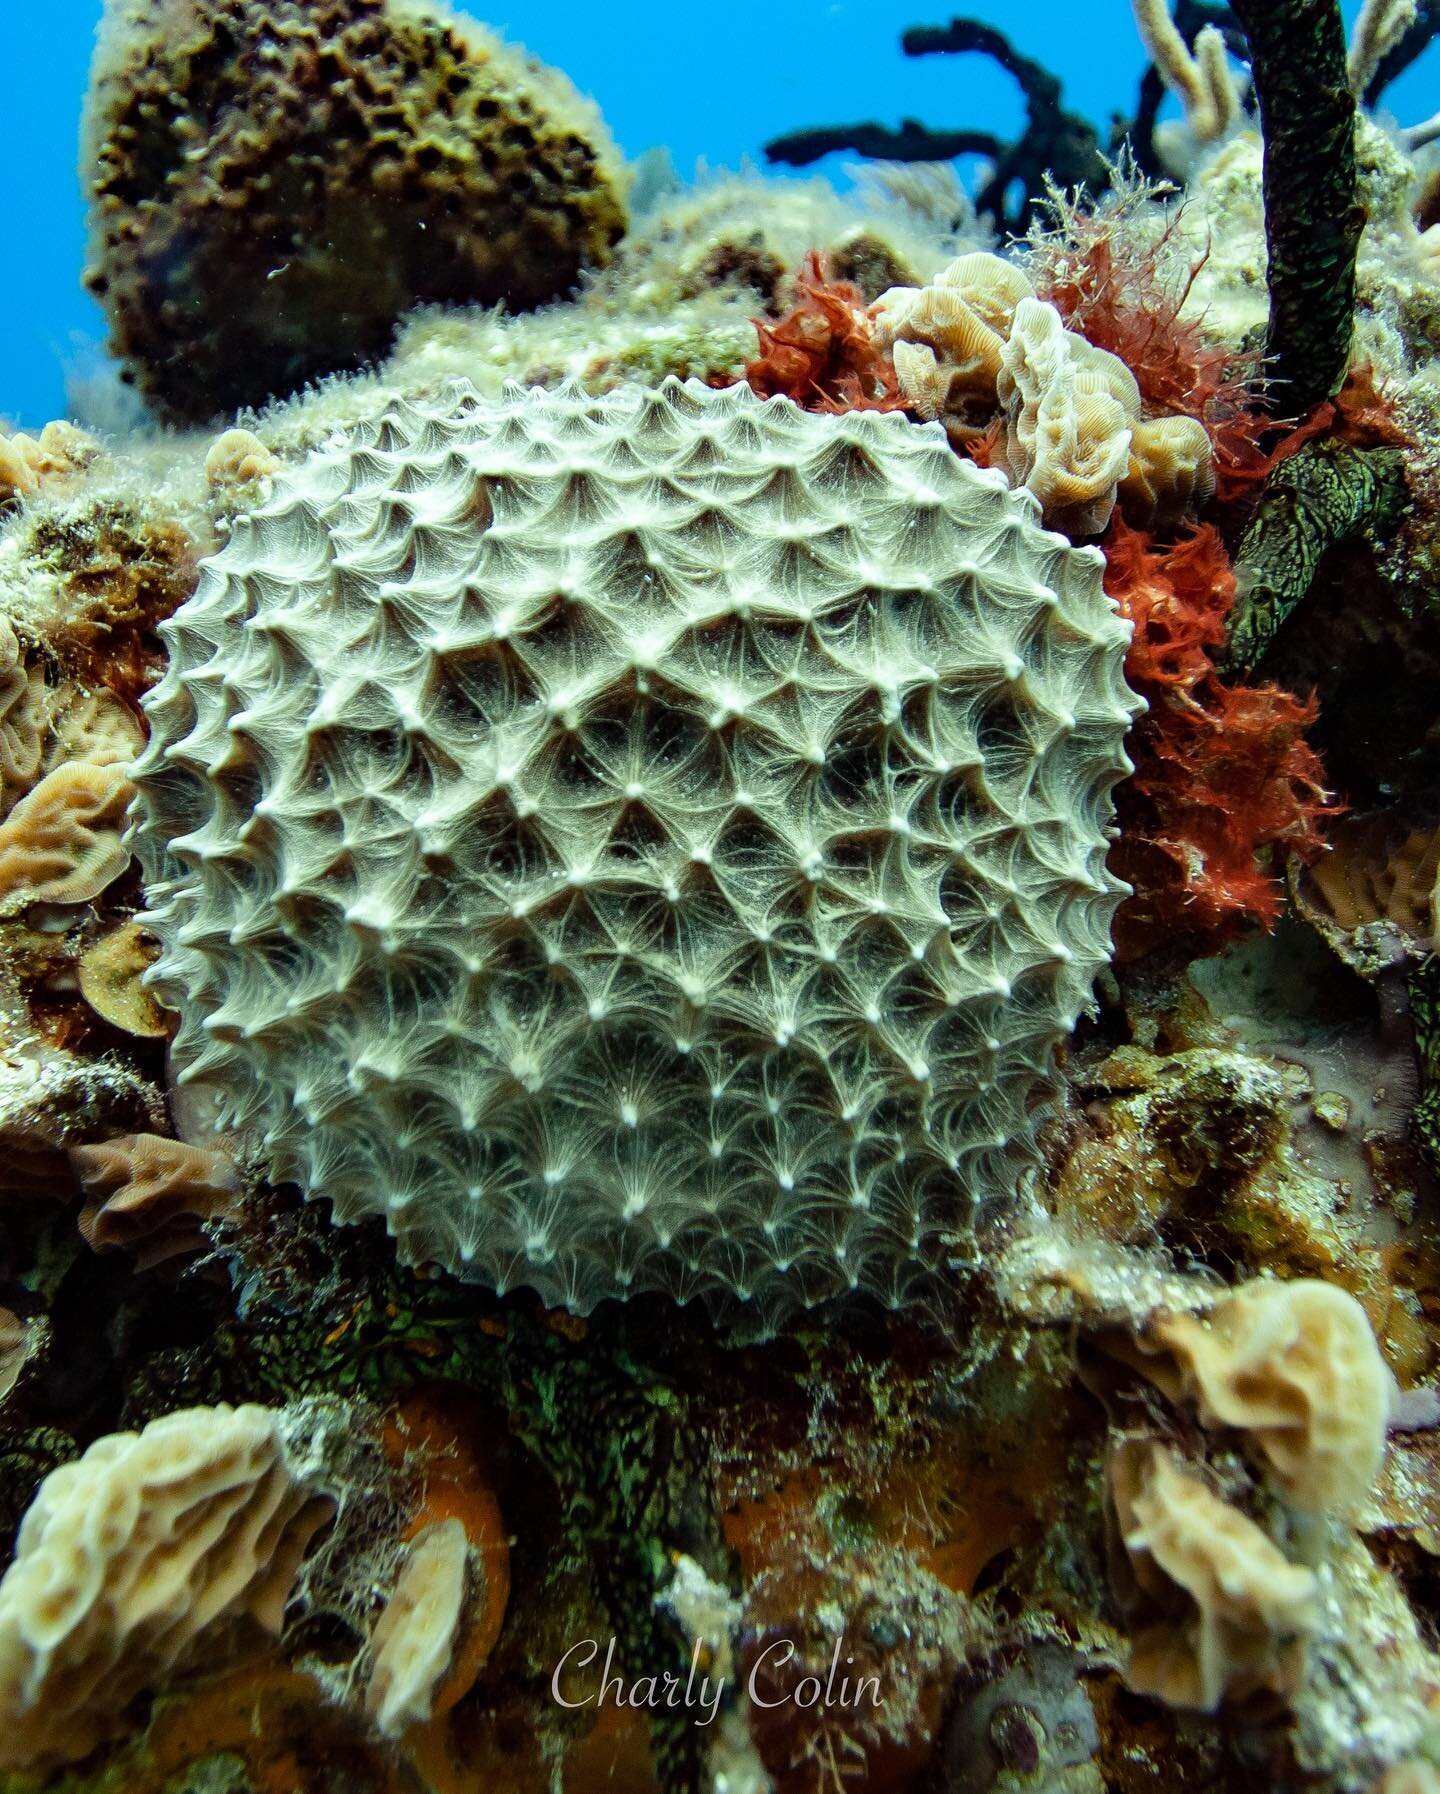 In Mexico, the number of reef-building corals is approximately 60 species, between 8 and 10% of all known species in the world.  The area with the greatest richness of hard coral species is the Caribbean and the Gulf of Mexico, where around 45 to 60 